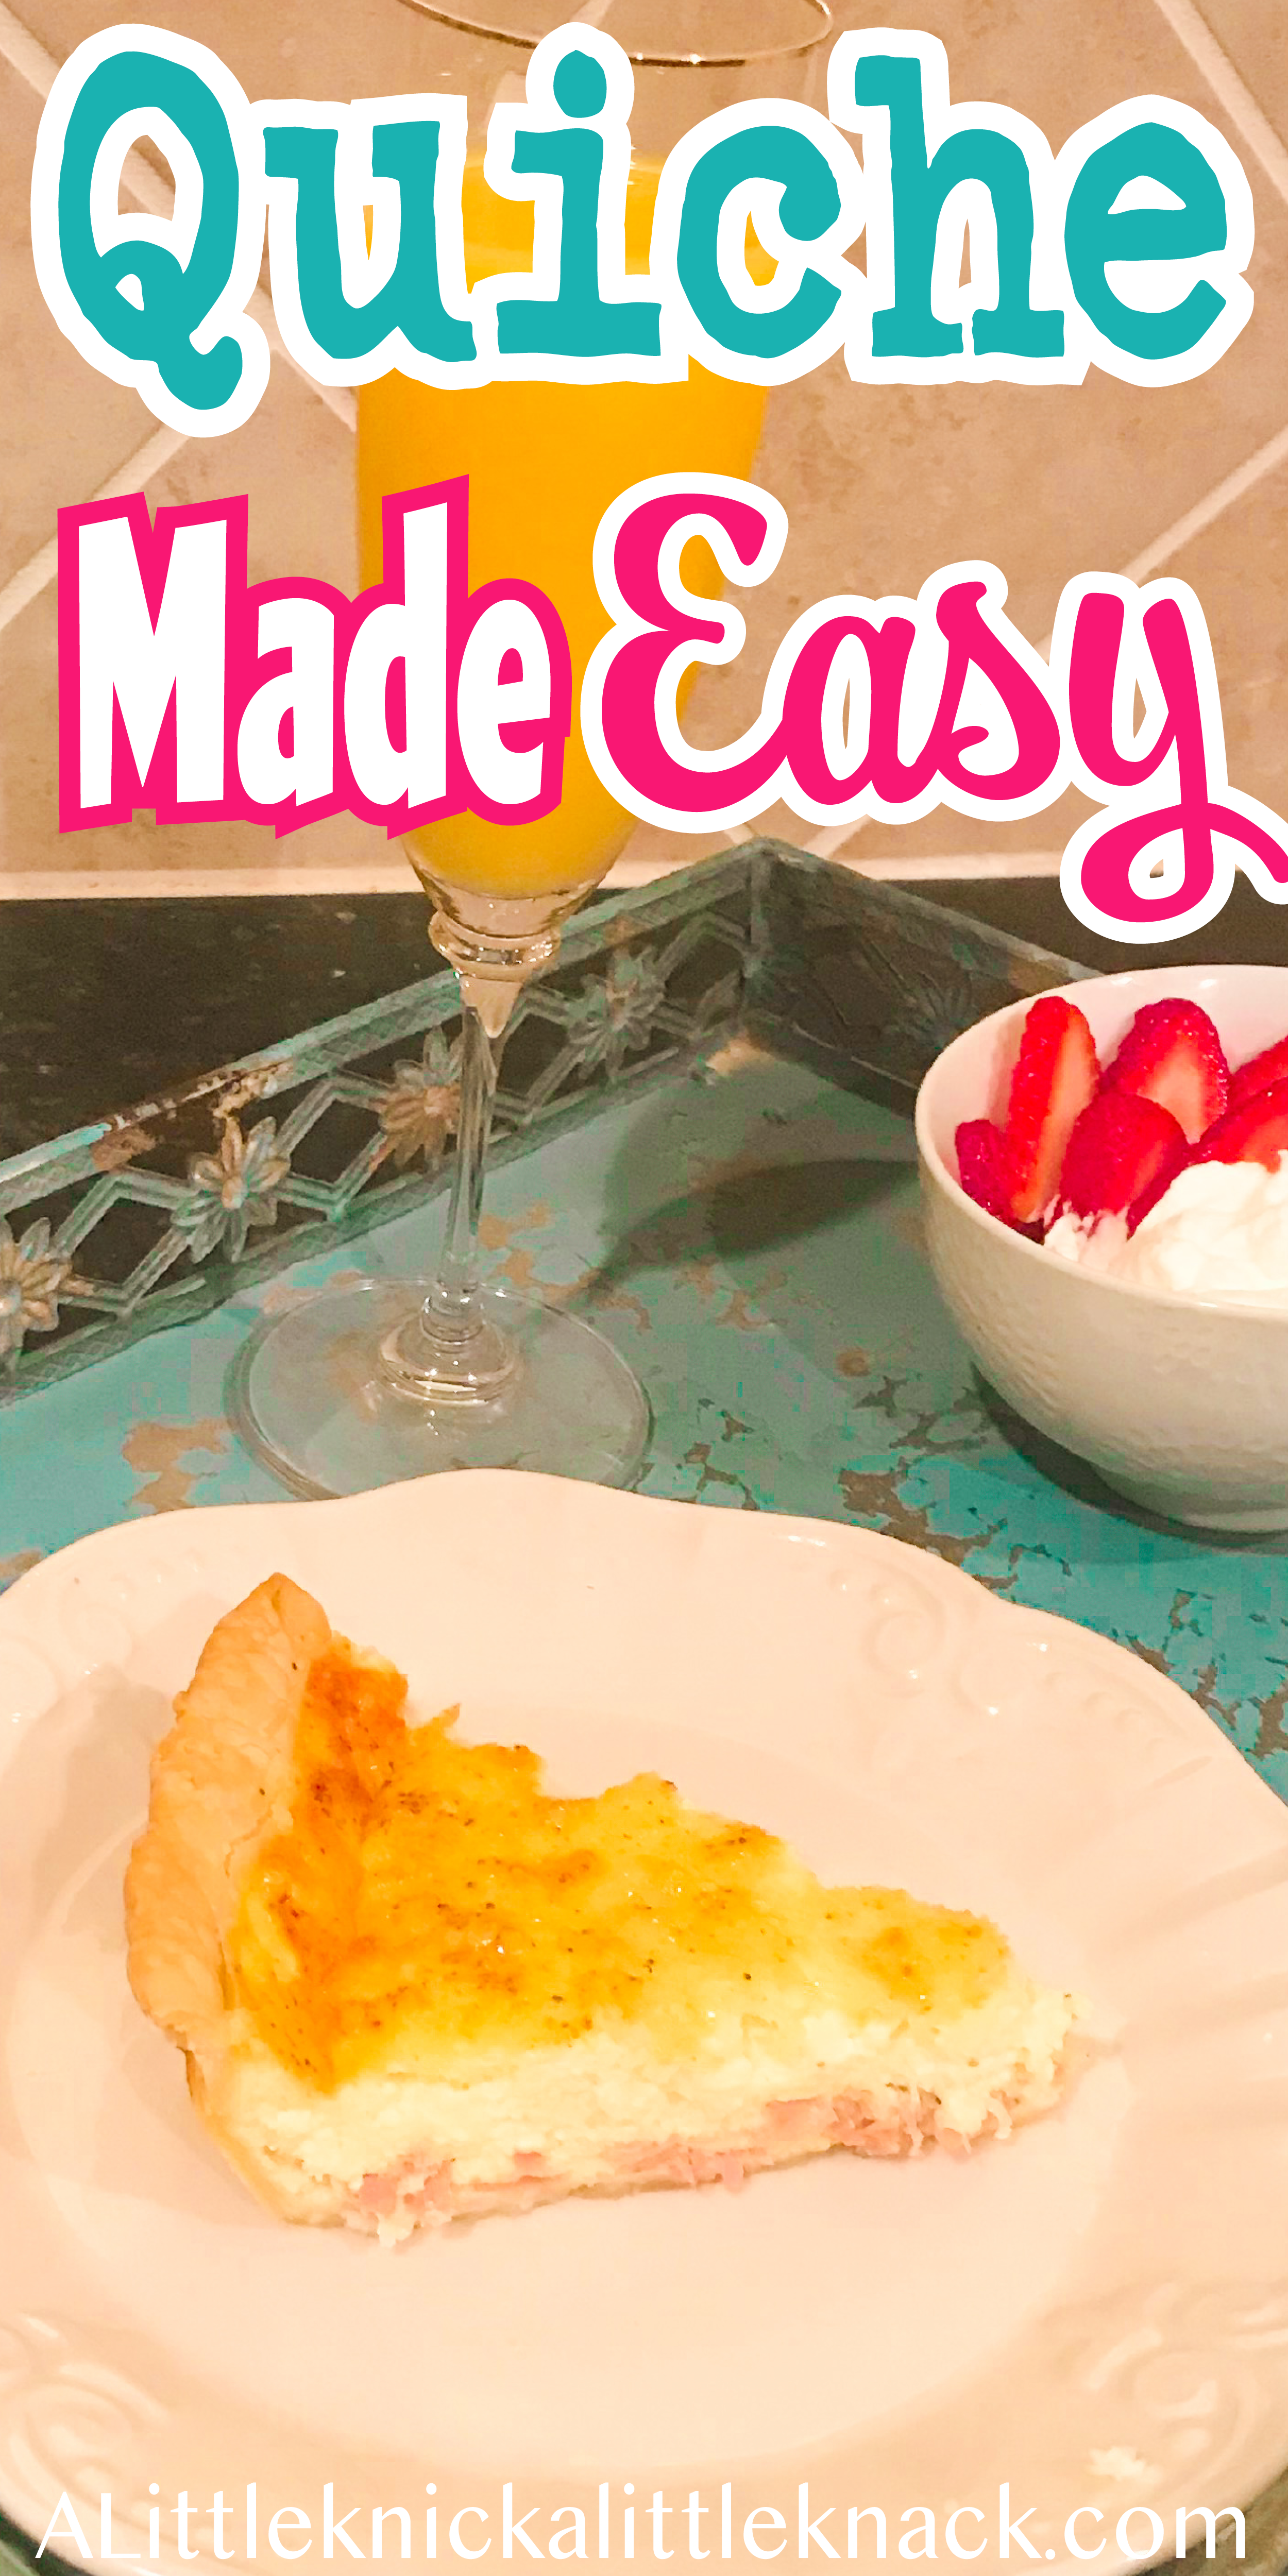 A slice of quiche on a teal tray along with strawberries and orange juice.